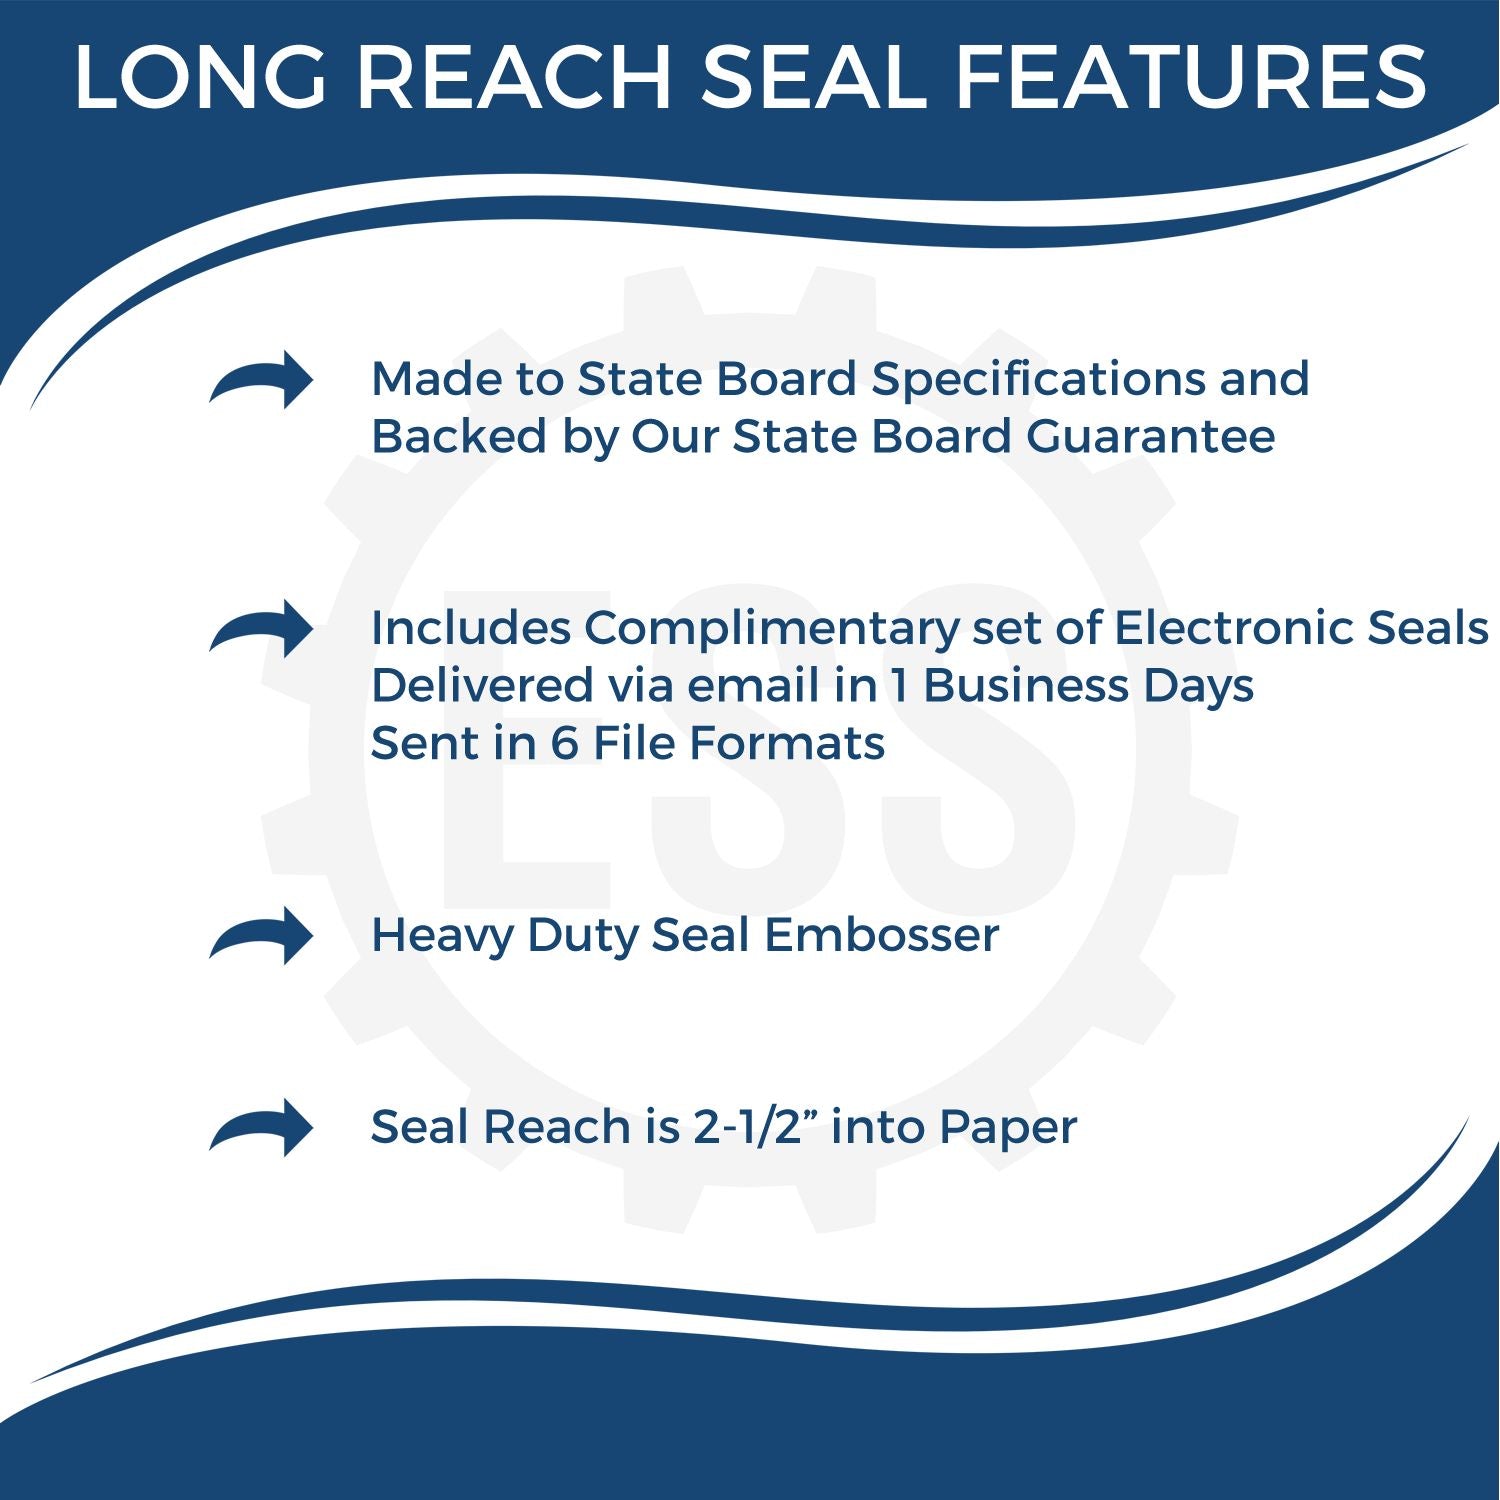 The main image for the Long Reach Pennsylvania PE Seal depicting a sample of the imprint and electronic files